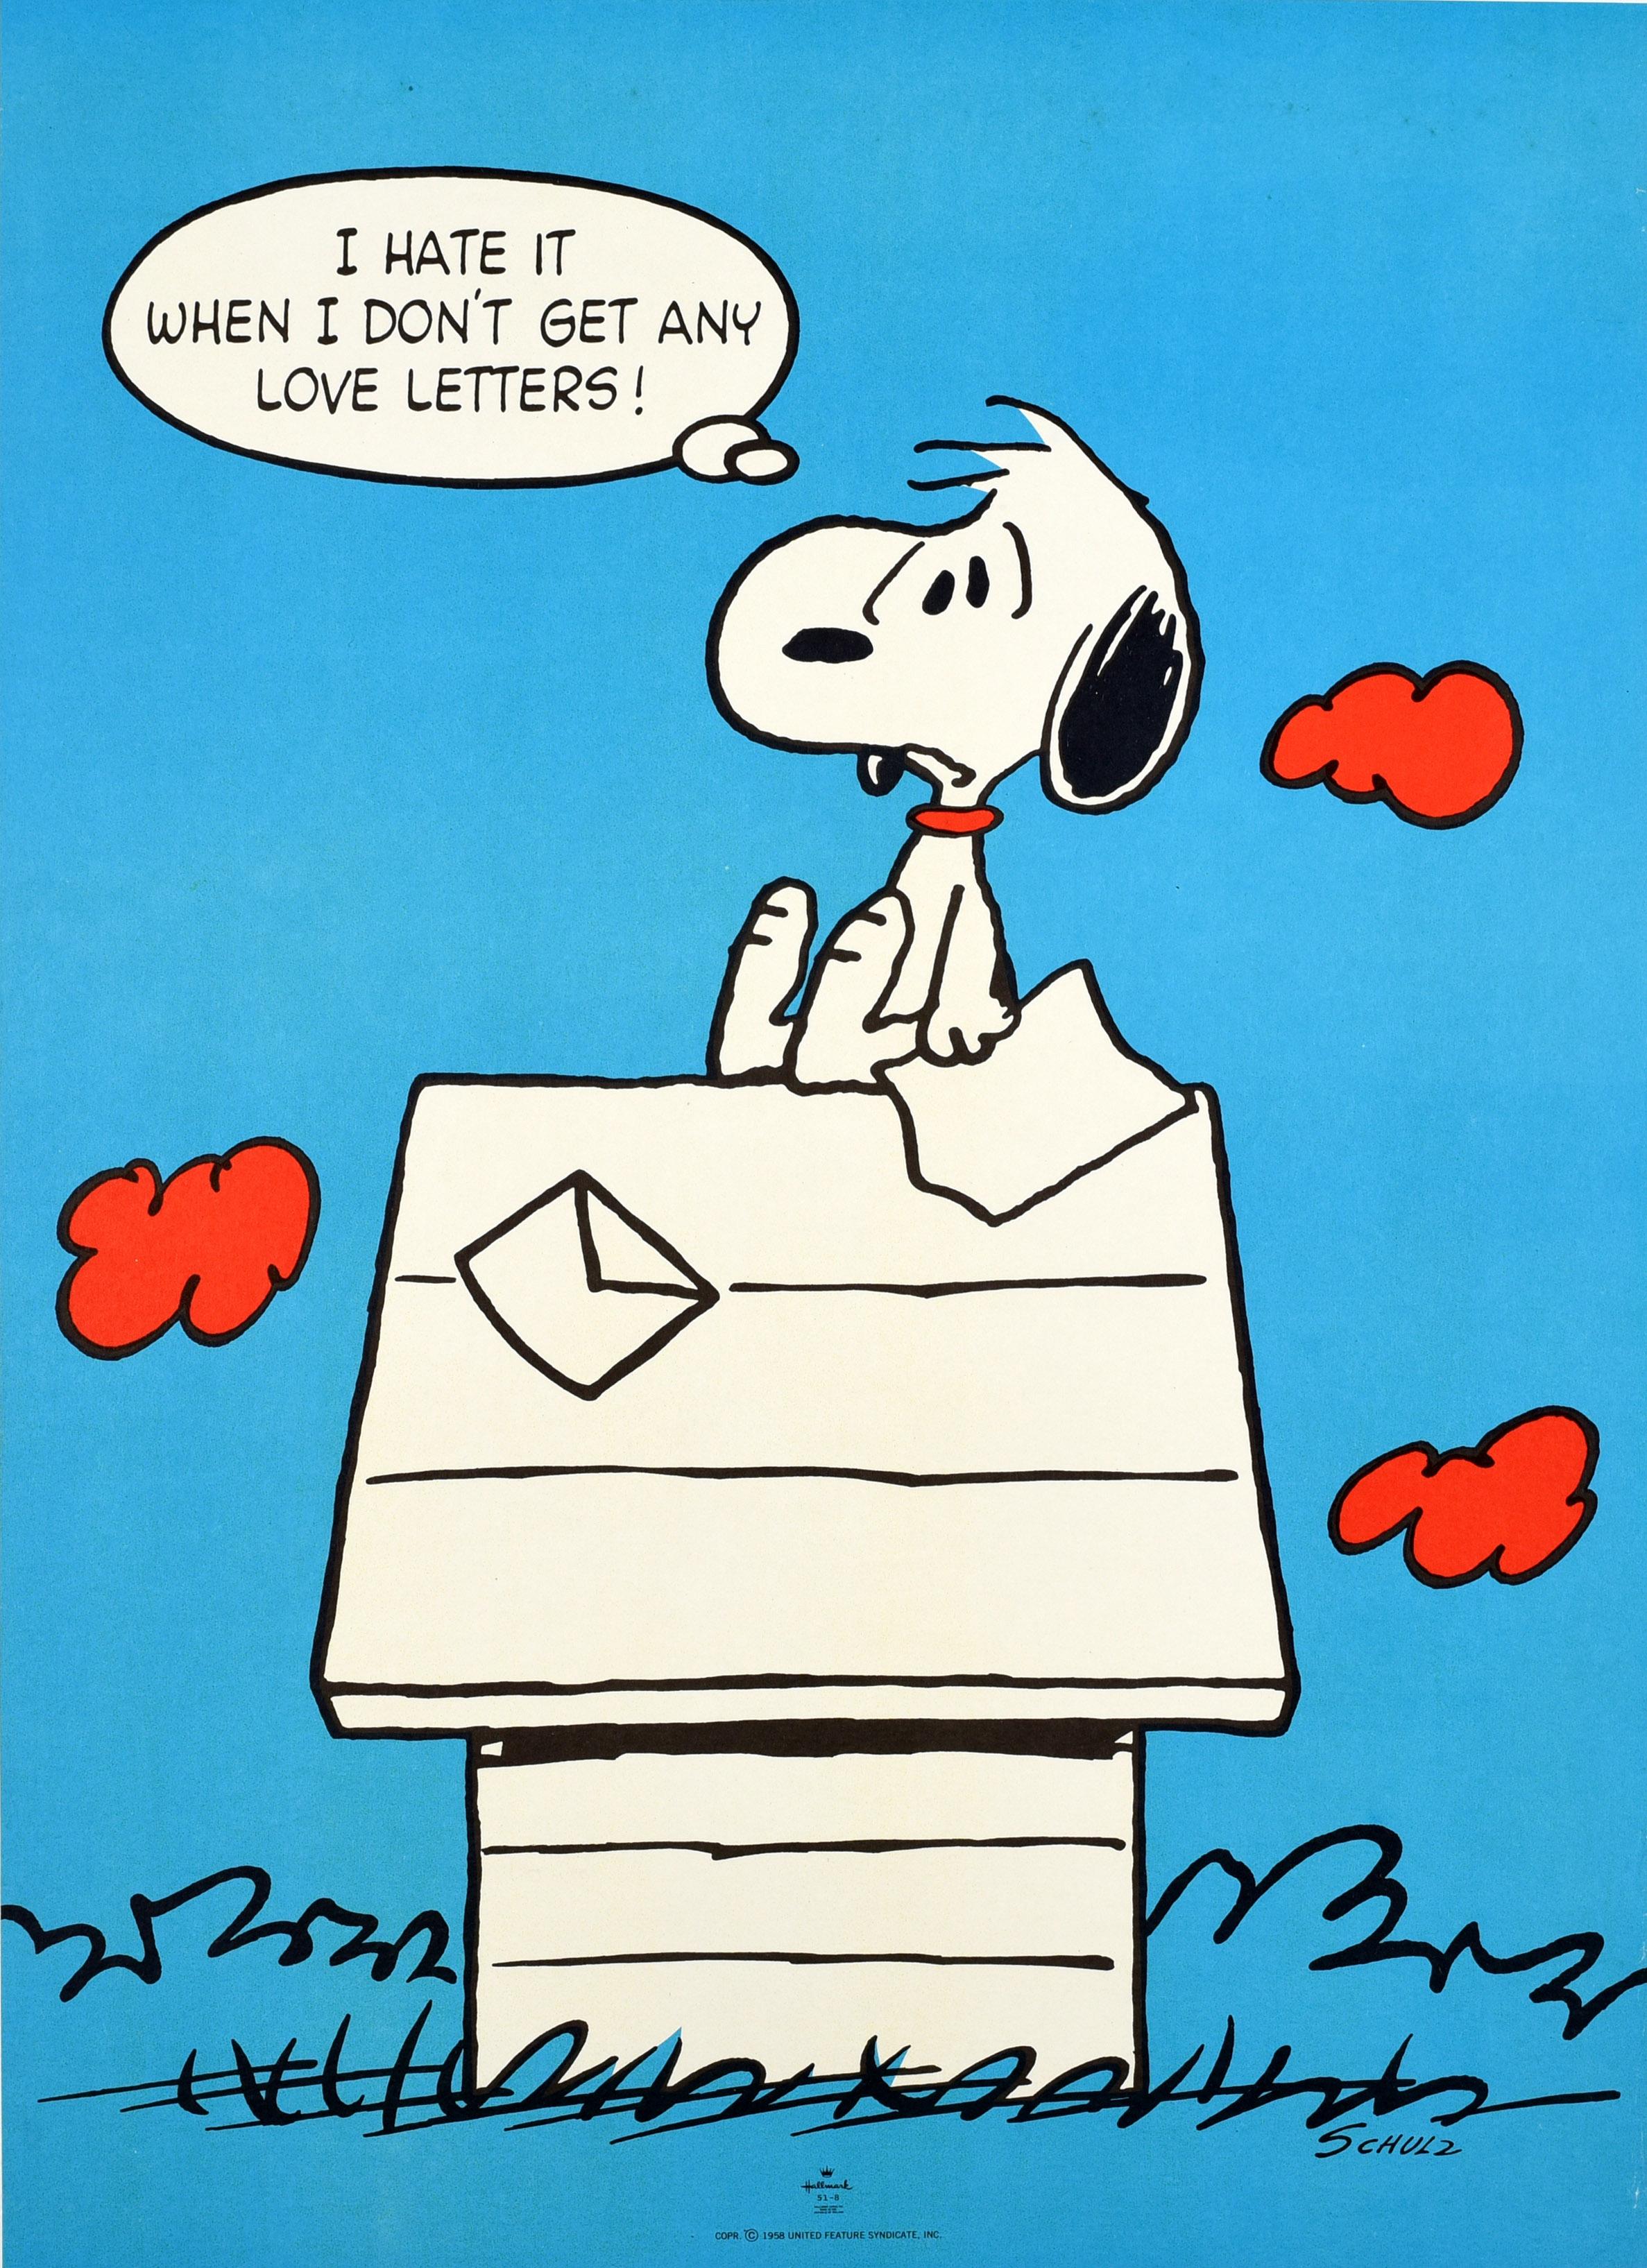 Charles M. Schulz Print - Original Vintage Poster I Hate It When I Don't Get Any Love Letters Snoopy Dog